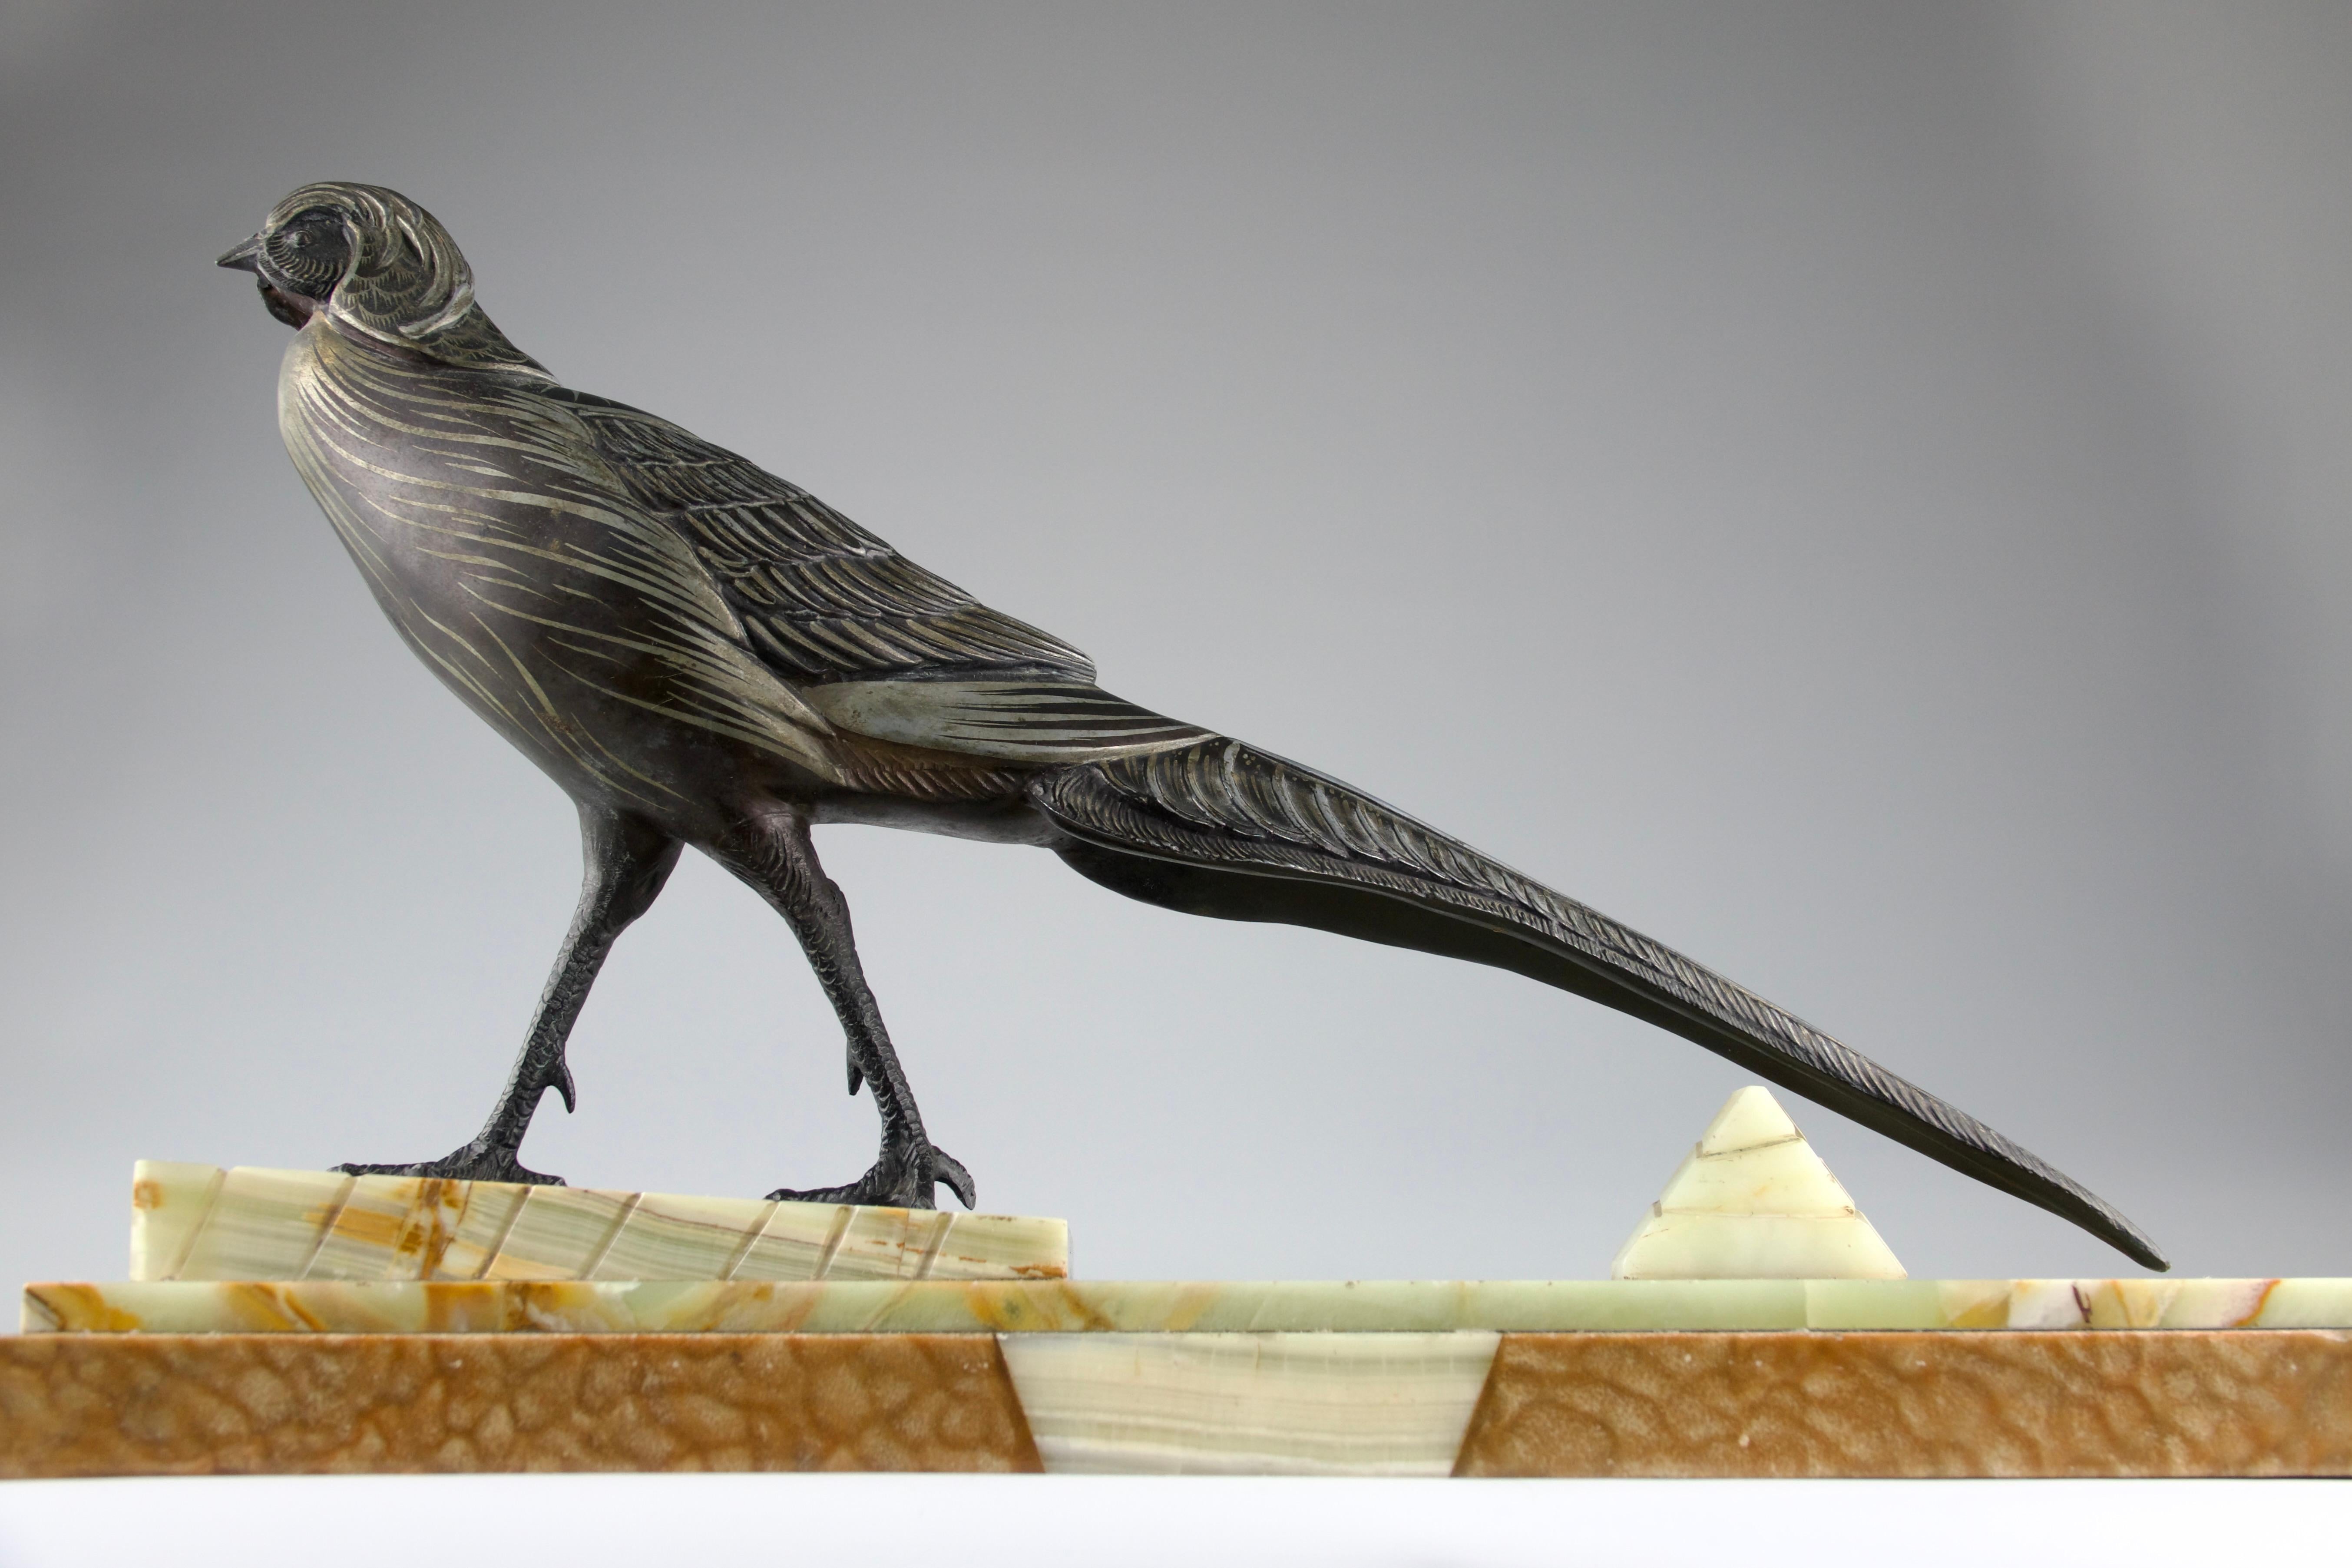 Superb spelter sculpture of a pheasant over a marble base. Intricate detail in the sculpture and patina alternating silver and black to simulate the coat's patterns as well as gouges in the marble simulating the traces left by the pheasant's talons.